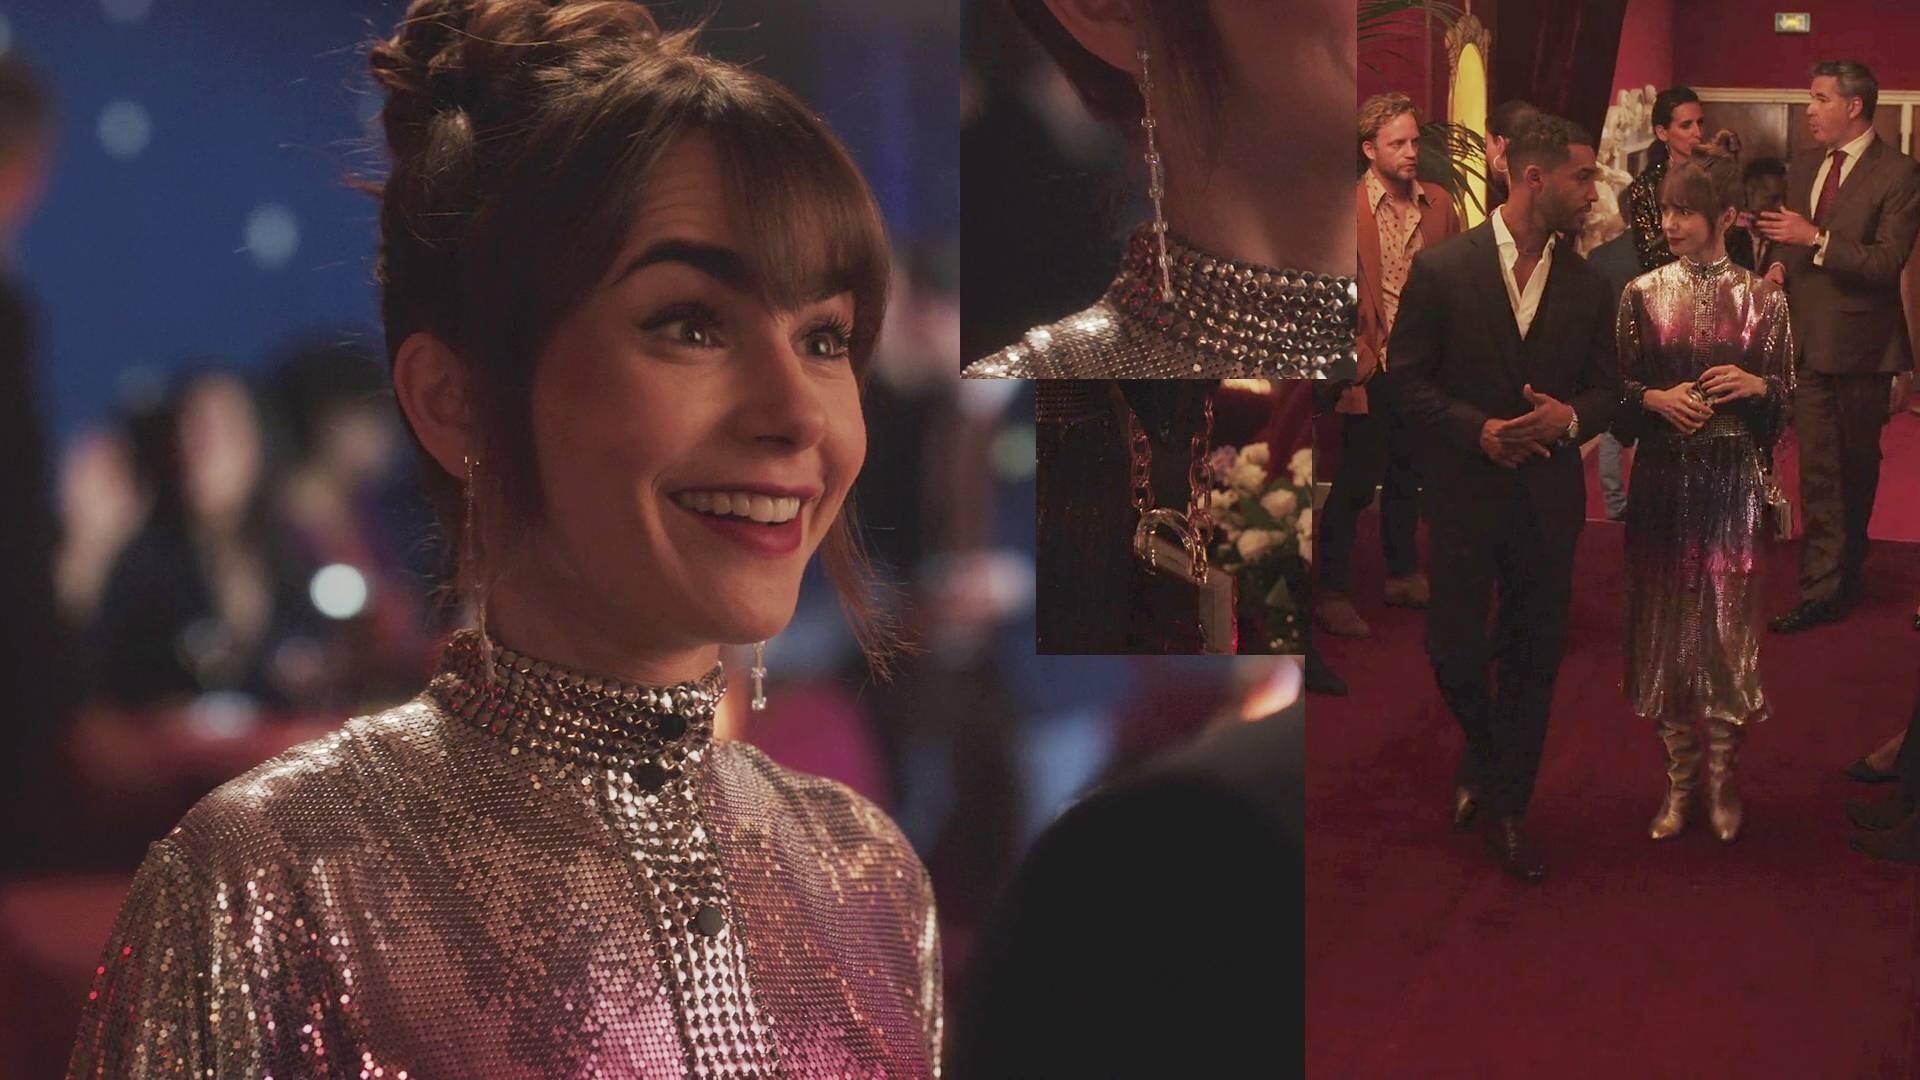 Lily Collins - Emily In Paris | Season 3 Episode 3 | Lily Collins style